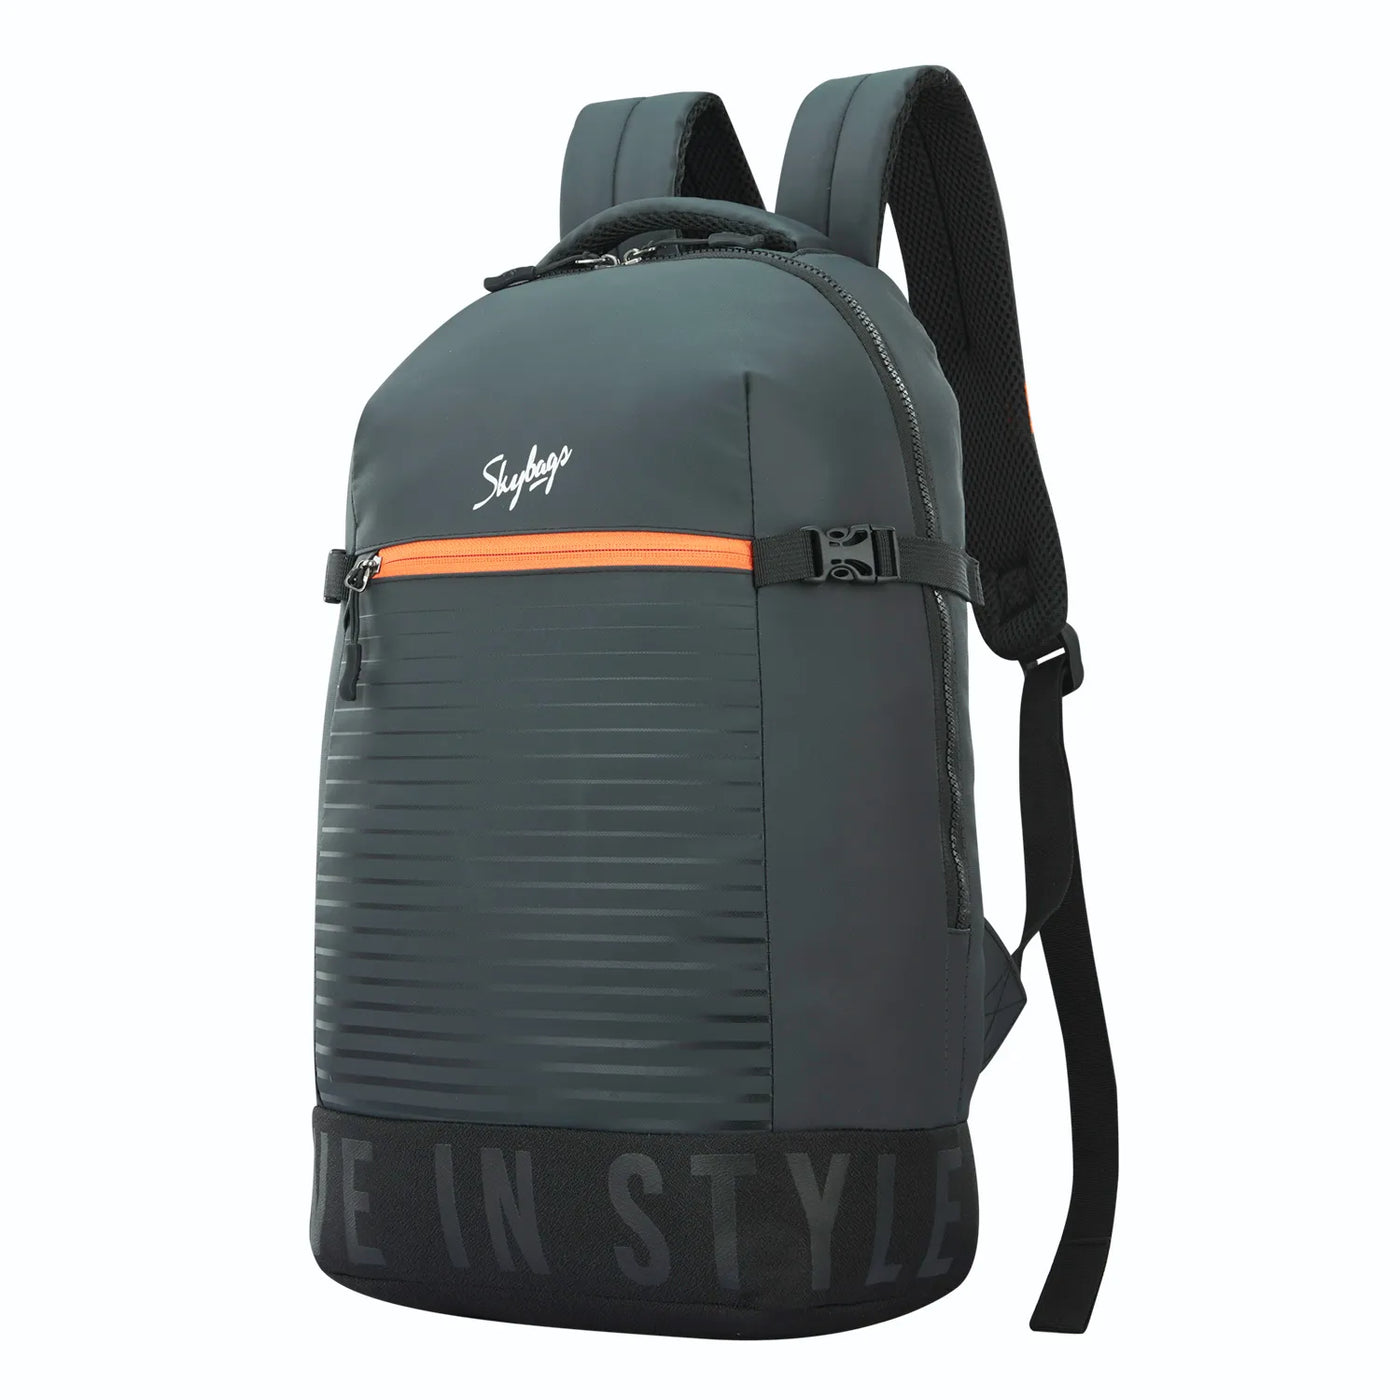 SKYBAGS BOHO "01 BACKPACK WITH RAIN COVER" BLACK